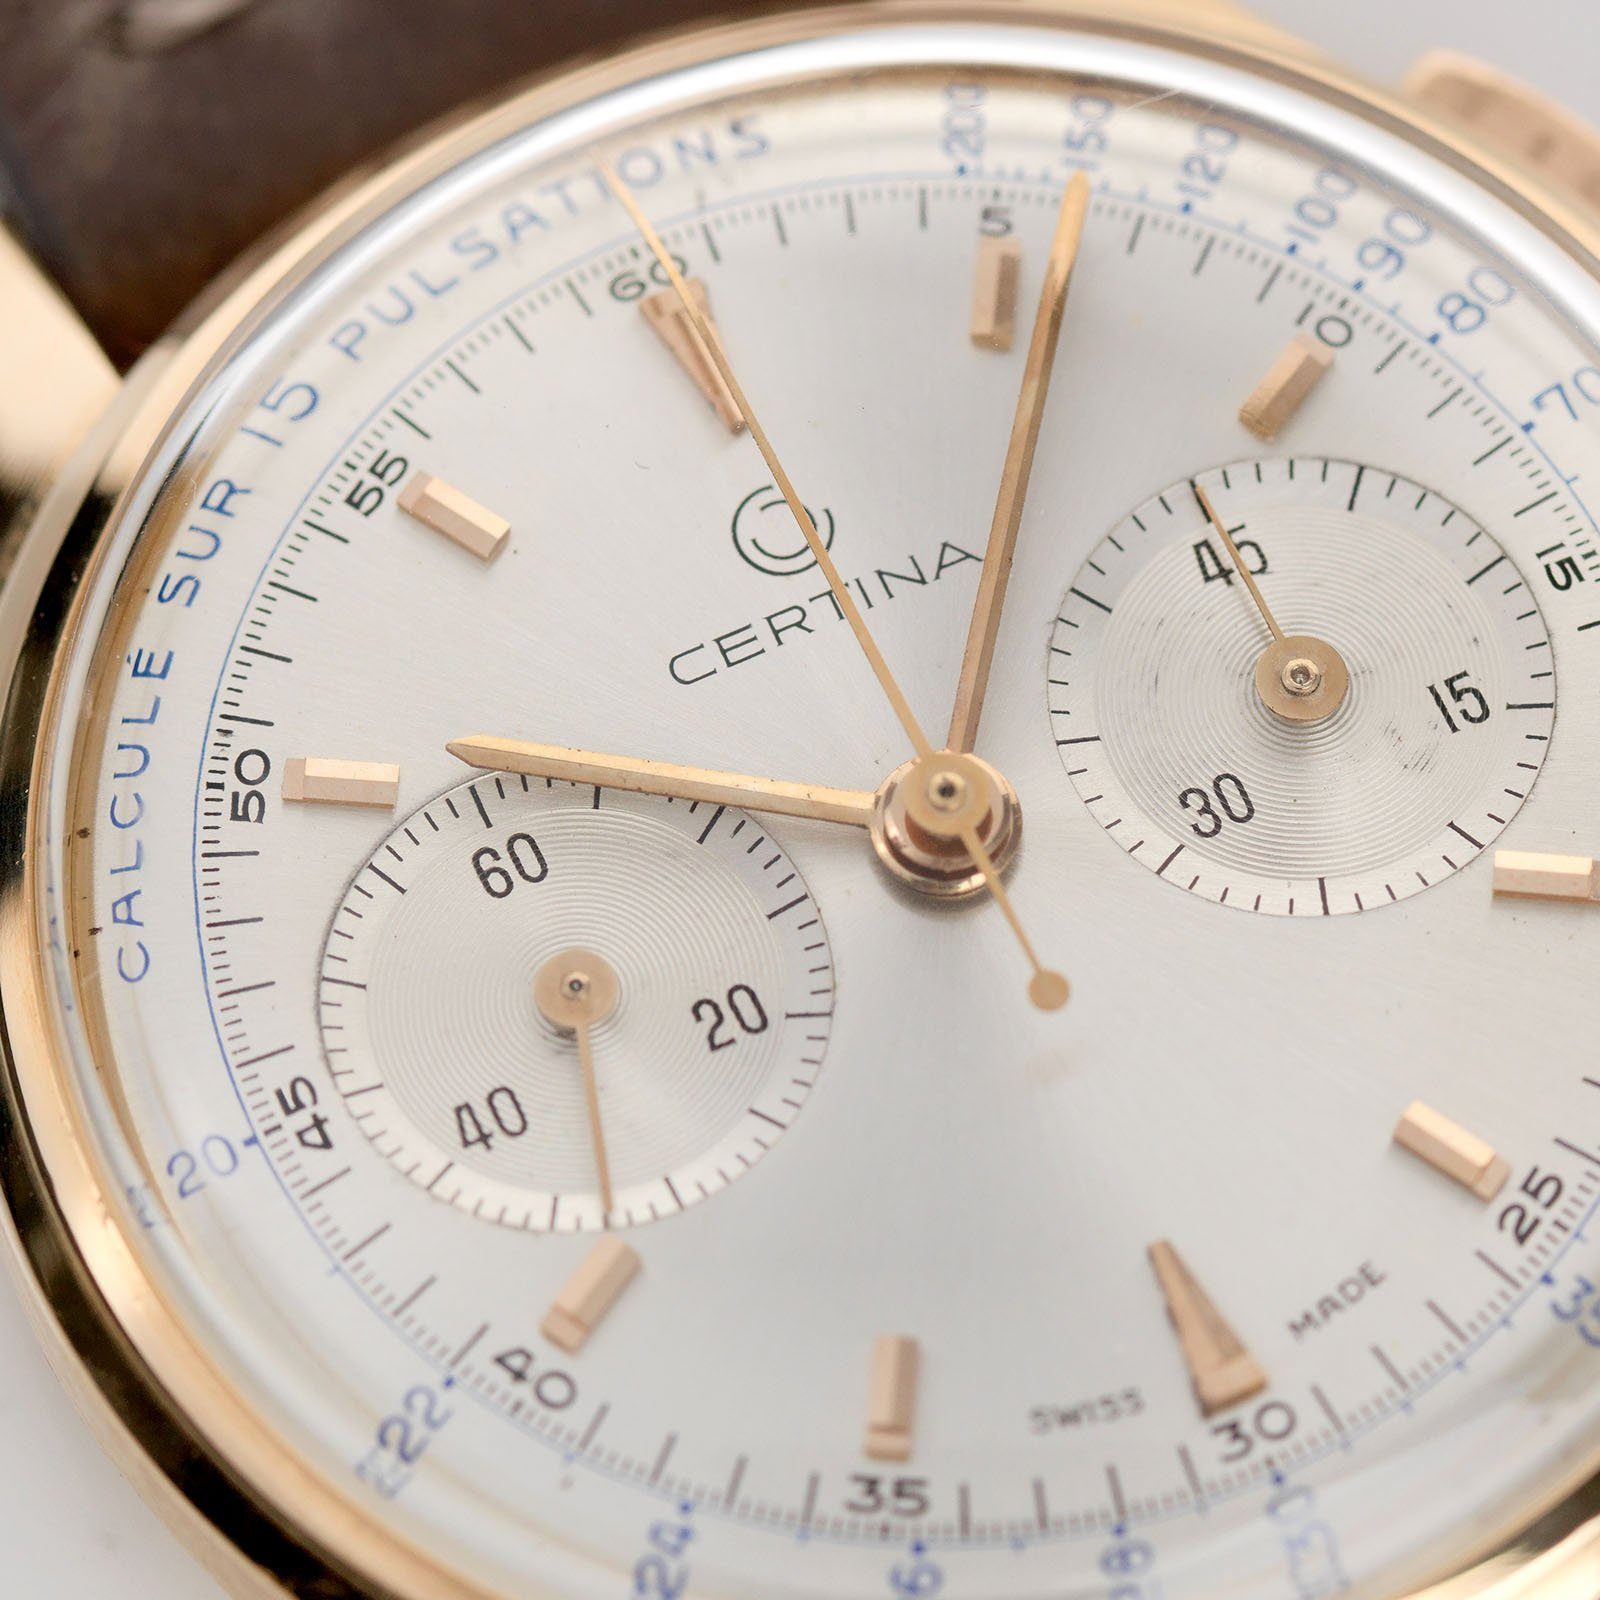 Certina Red Gold Pulsometer Chronograph 1940s